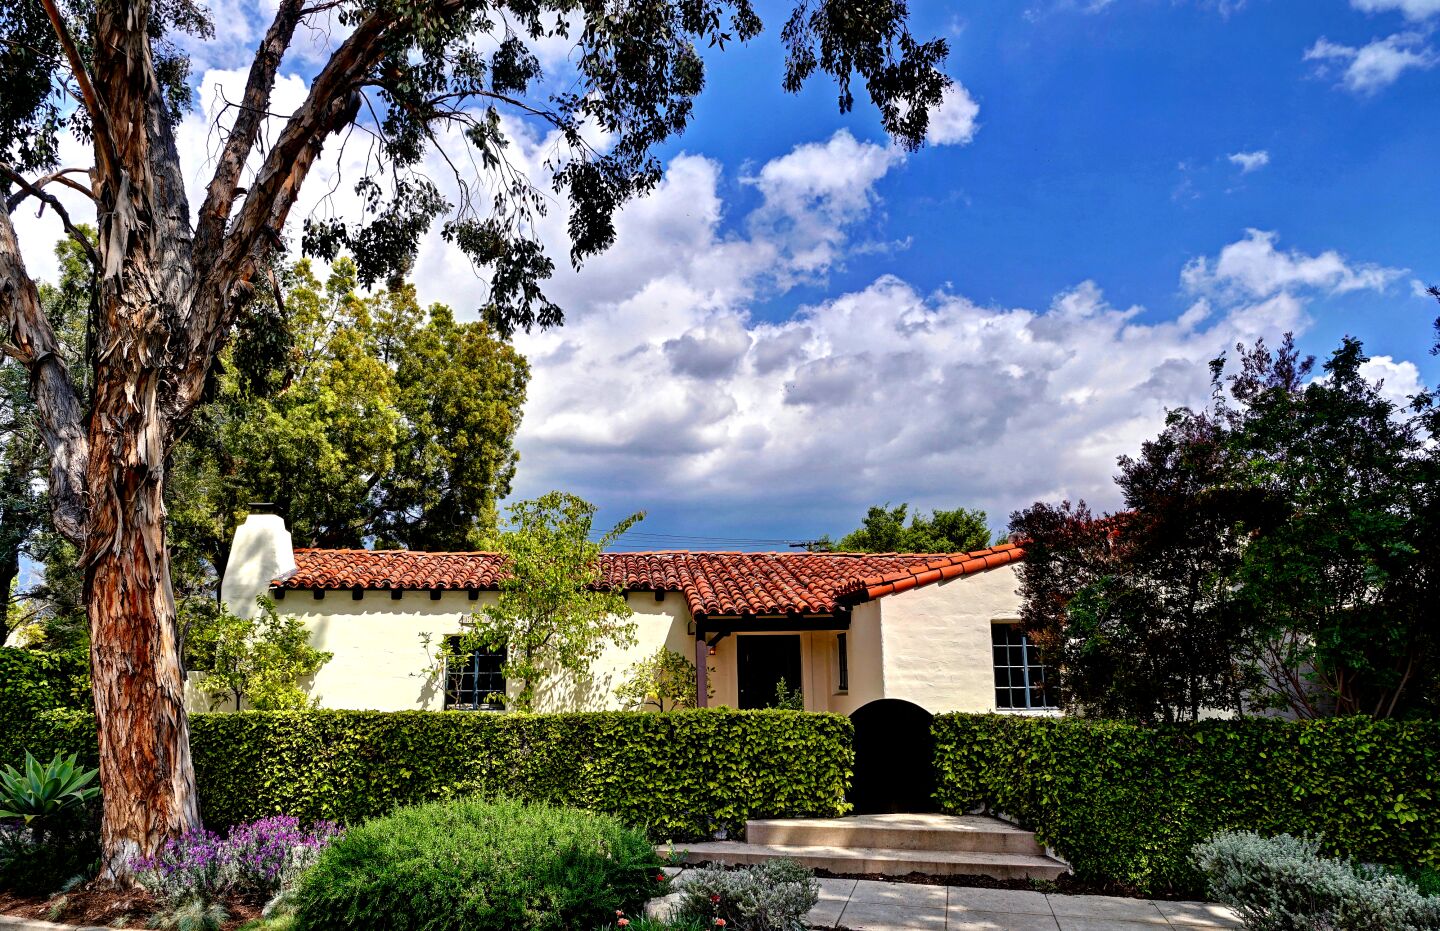 The Spanish Colonial Revival-style home, designed by George S. Hamrick, was built in 1925 buy local contractor Fritz Ruppel for his mother, Gertrude. The one-story residence, which has a clay tile roof and reinforced-concrete walls, was built at a cost of $7,000. Listed for $1.495 million, the charming residence opens to a grand living with cathedral-style ceilings, exposed beams and a wood-burning fireplace. The formal dining room sits off the kitchen, which has been updated with a stainless steel range and farmhouse-style sink. A French door in the kitchen leads outside to a small herb garden. The 1,825-square-foot floor plan has three bedrooms and two bathrooms. Tilework in one of the two bathrooms is reminiscent of the work of master craftsman Earnest Batchelder.